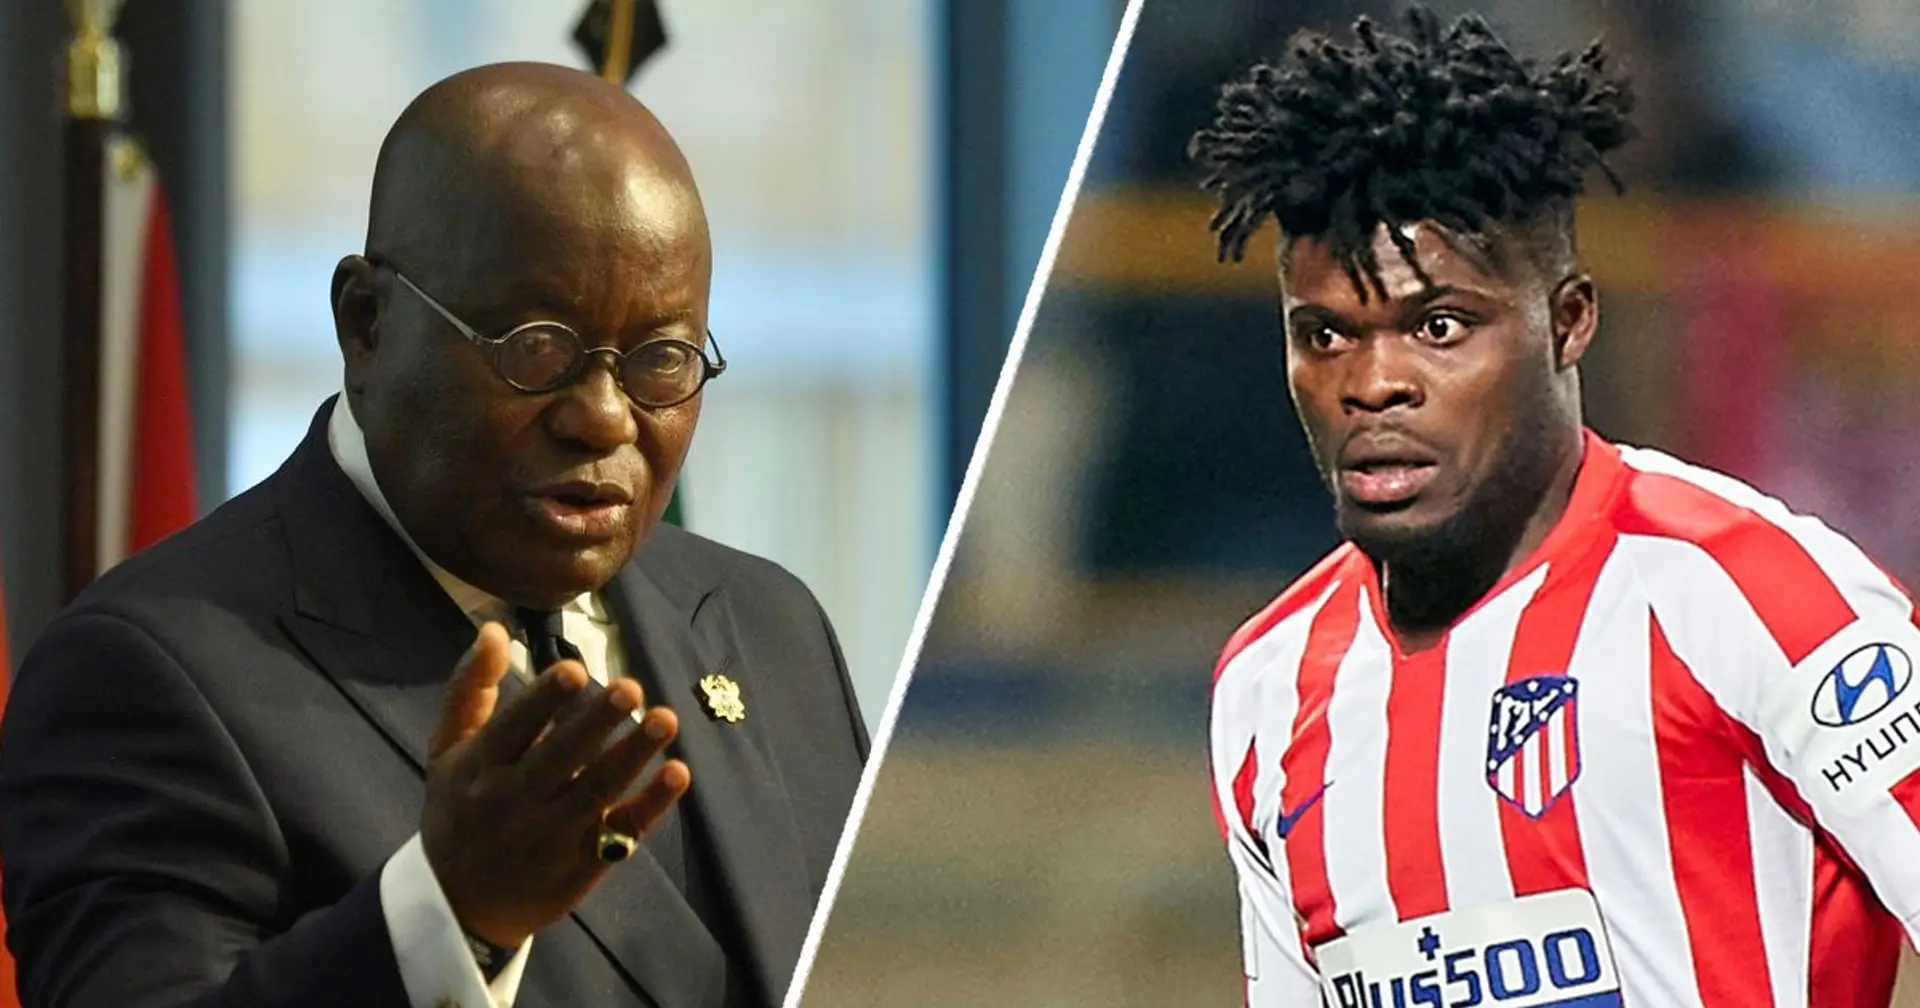 Ghana president addresses nation during pandemic – fan asks him whether Partey would join Arsenal